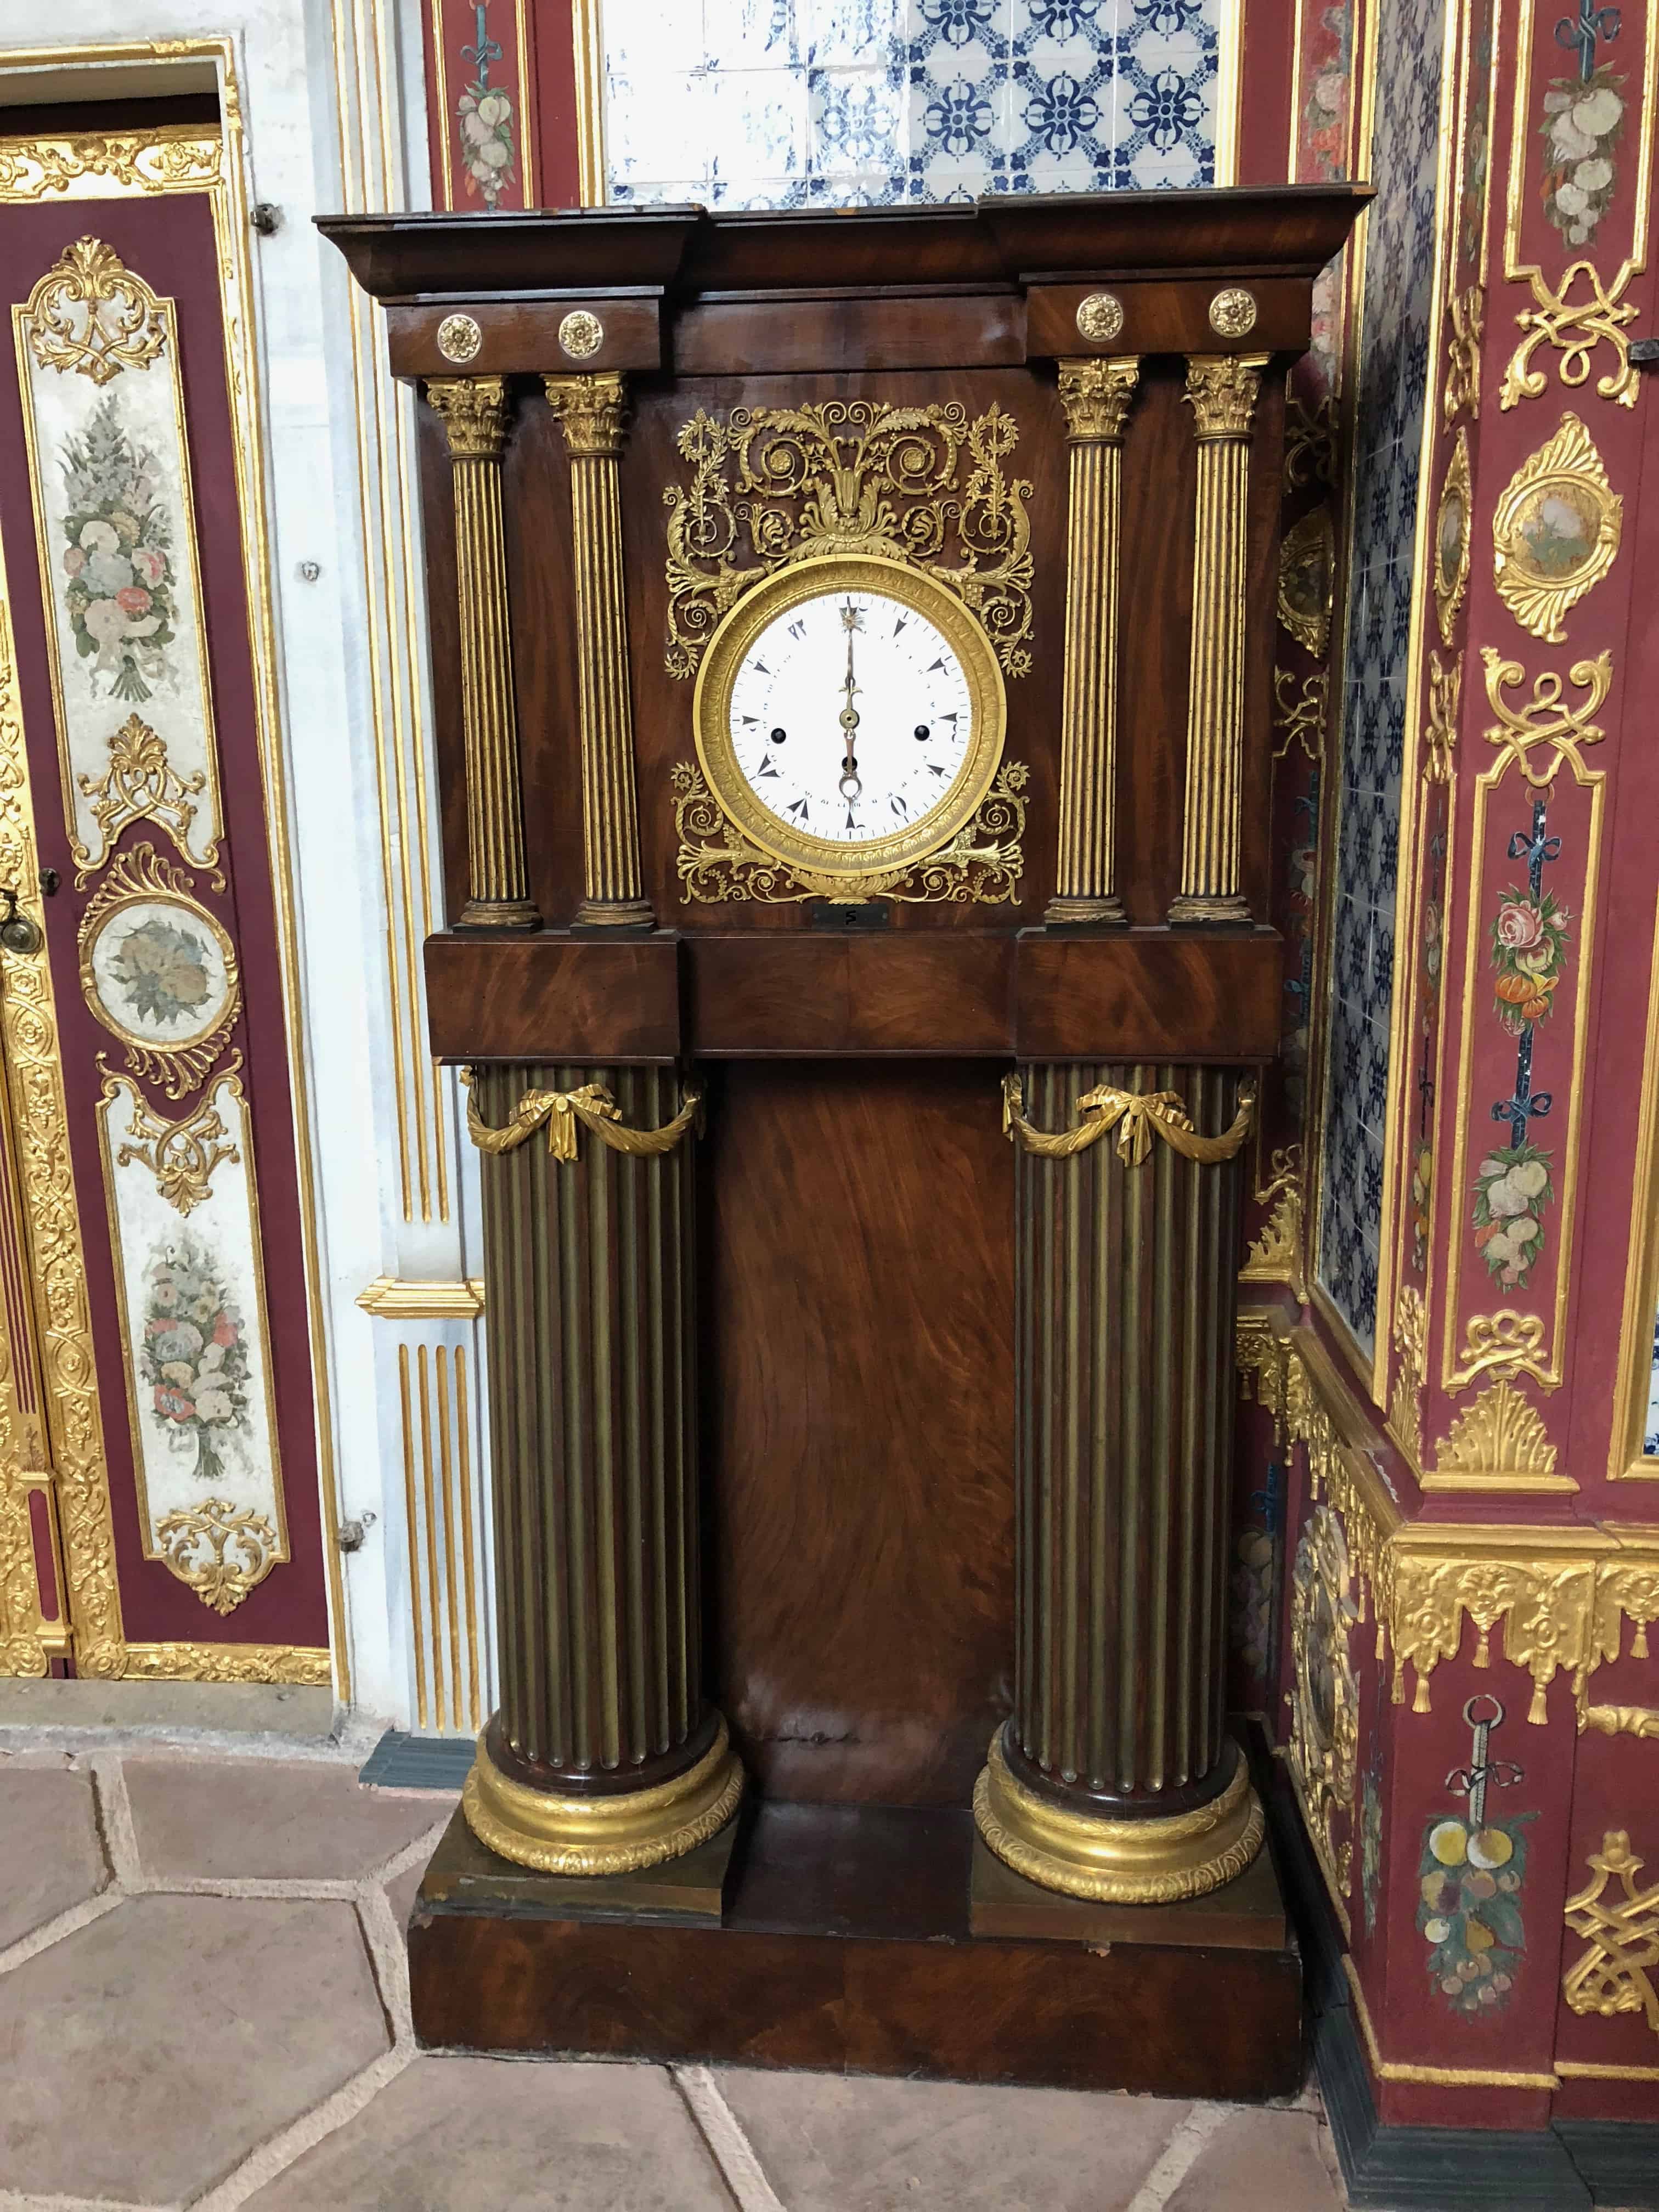 A clock given by Queen Victoria in the Imperial Hall in the Imperial Harem at Topkapi Palace in Istanbul, Turkey